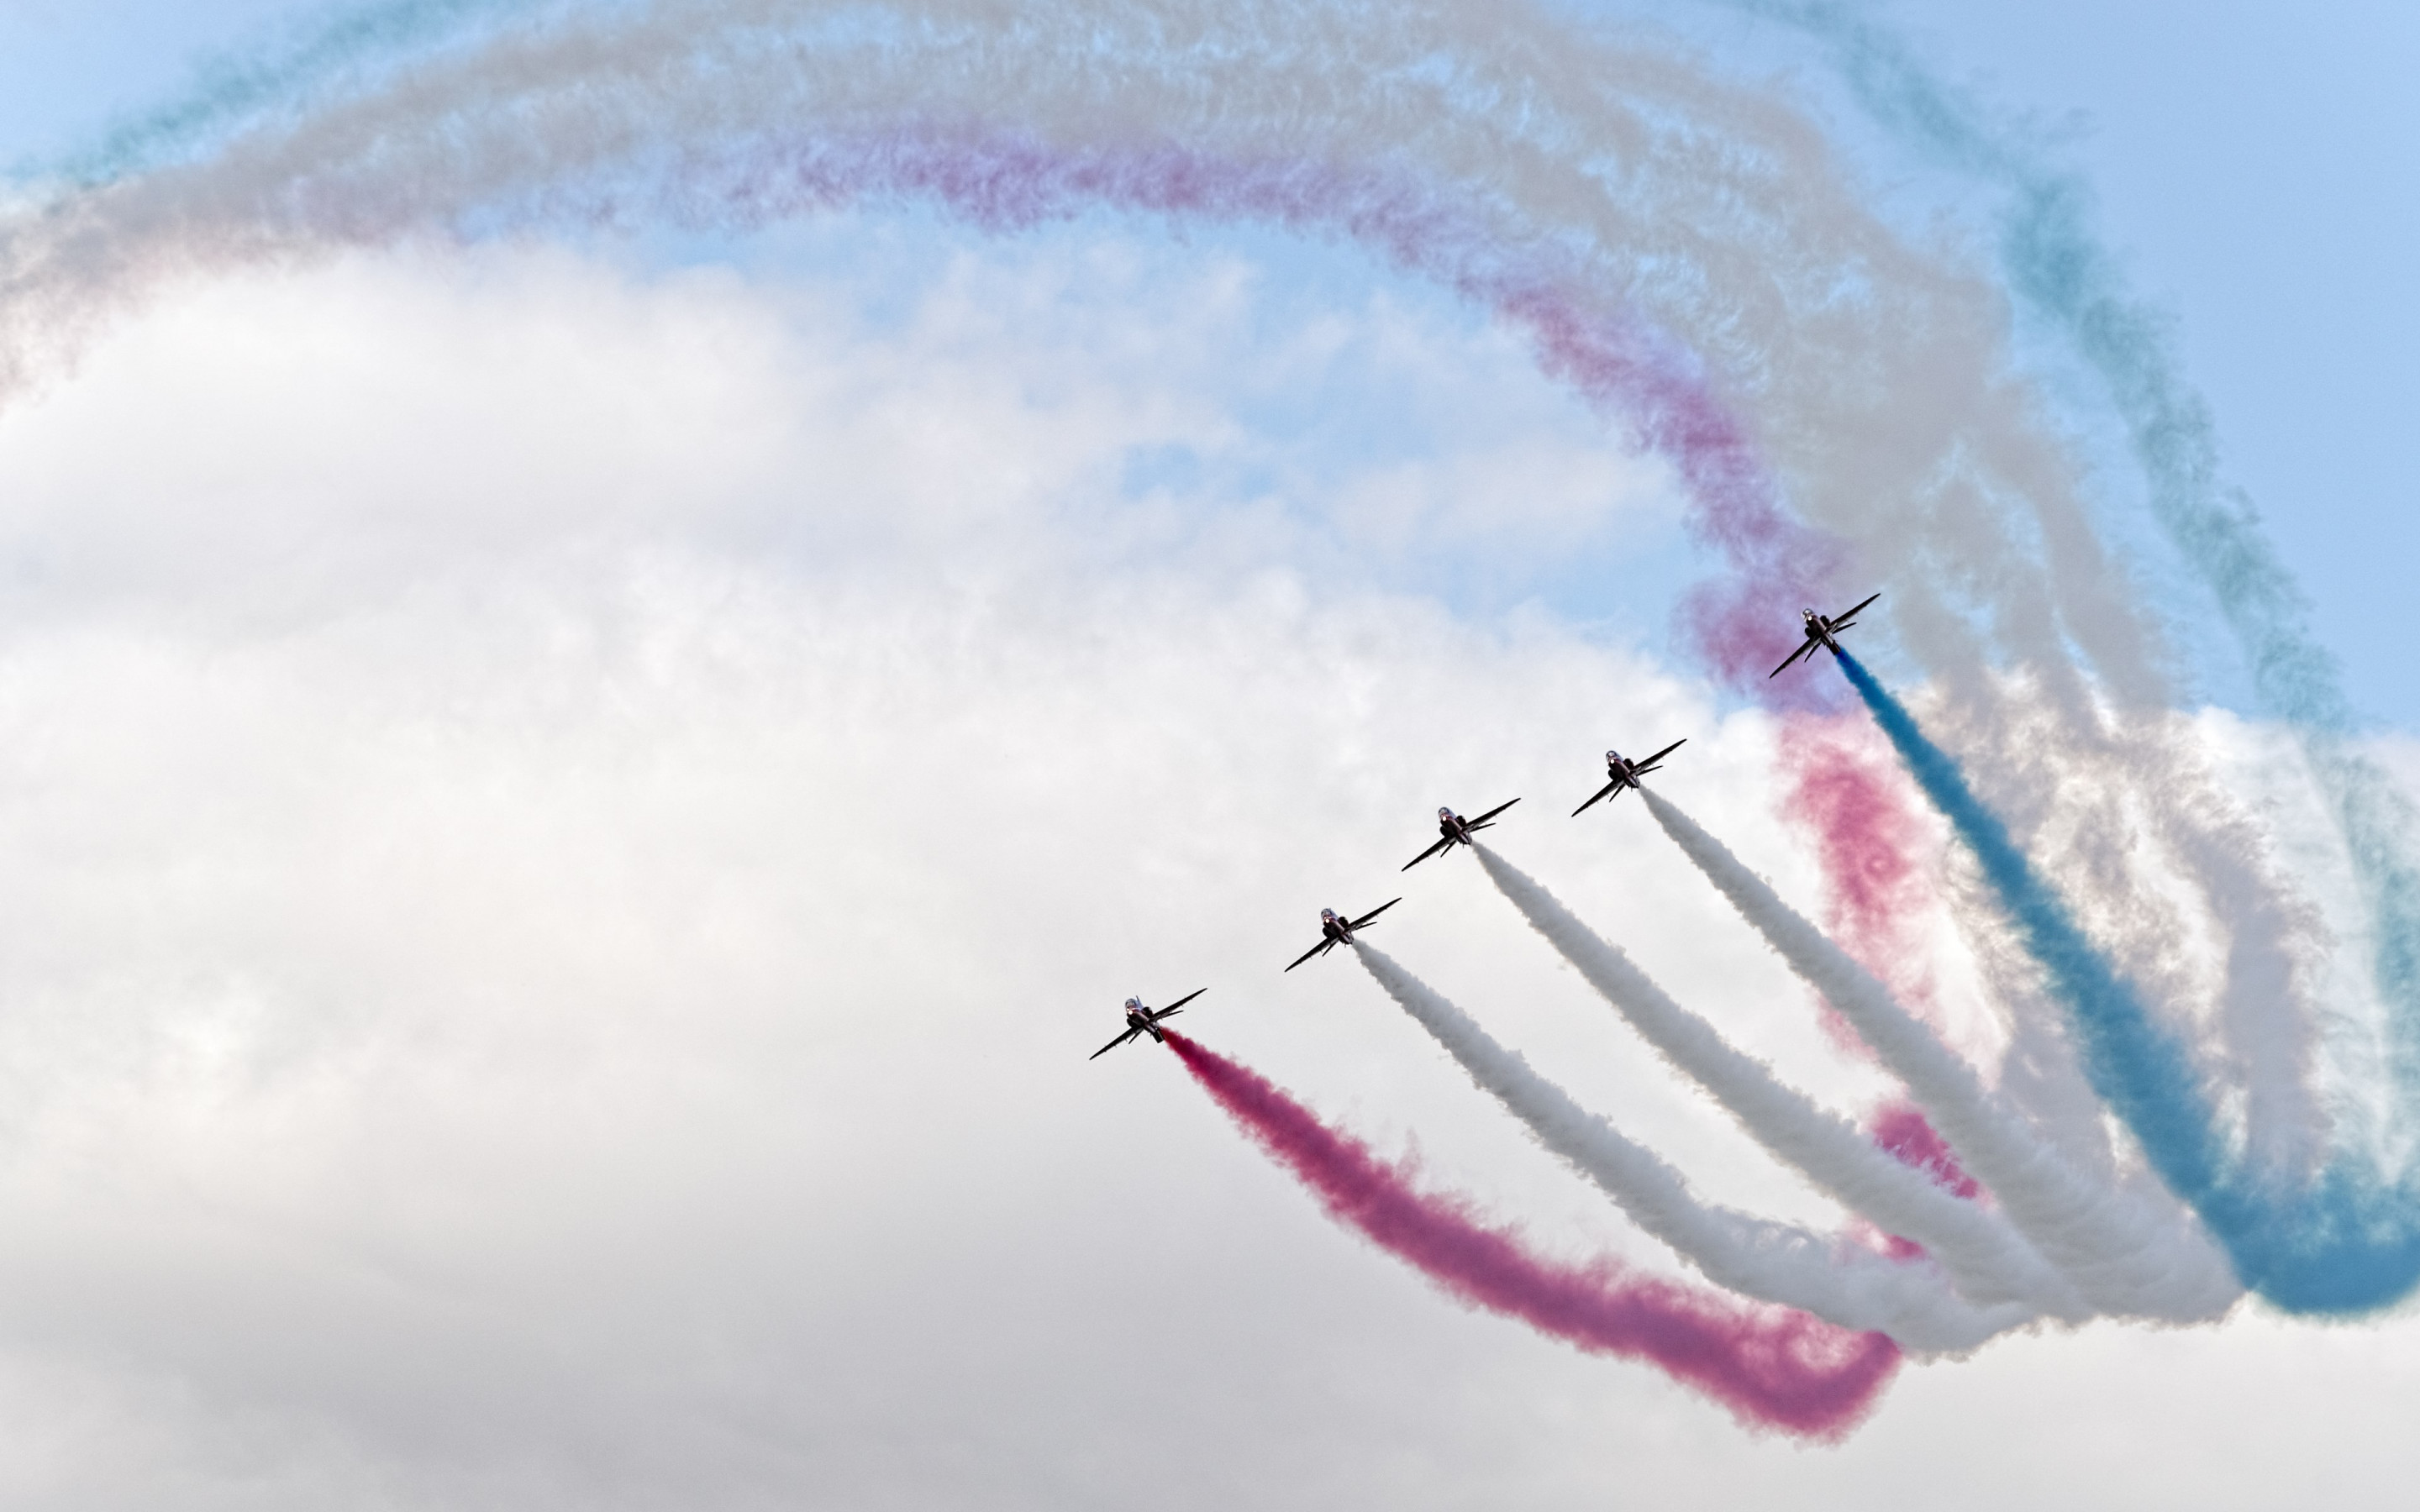 Red Arrows at Sywell Air Show wallpaper 2880x1800